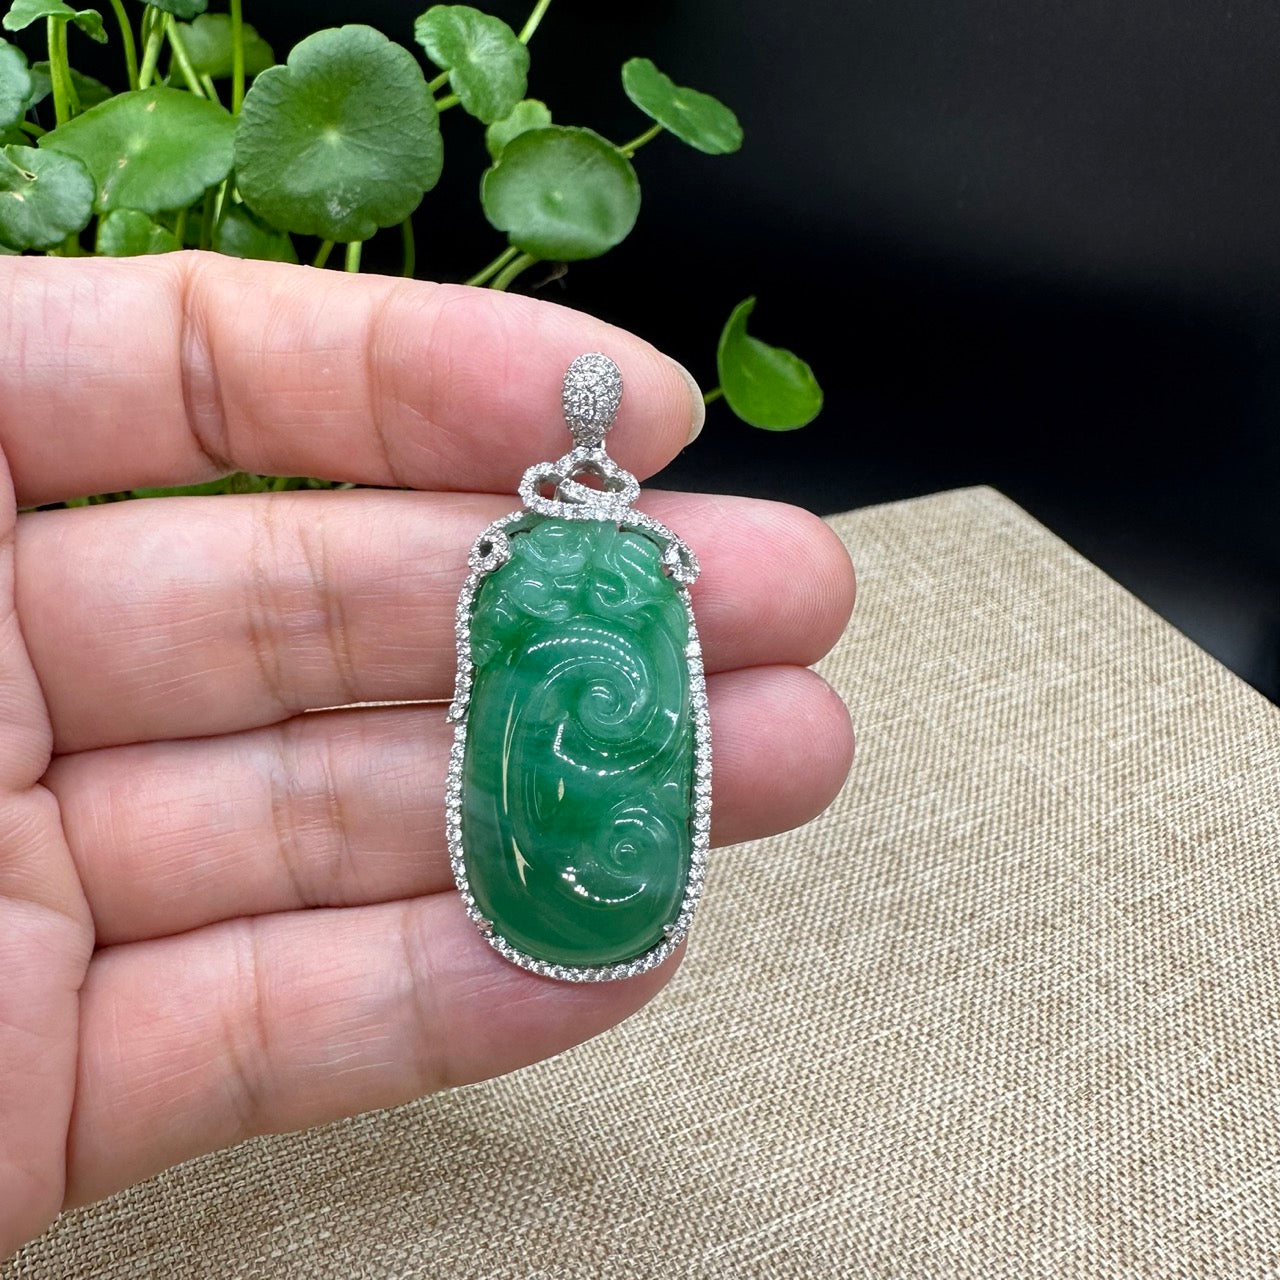 Buy Small Jade Buddha Necklace, Real Jade Necklace, Spiritual Symbol  Jewelry, Pendant Necklace, Jewelry for Women Online in India - Etsy